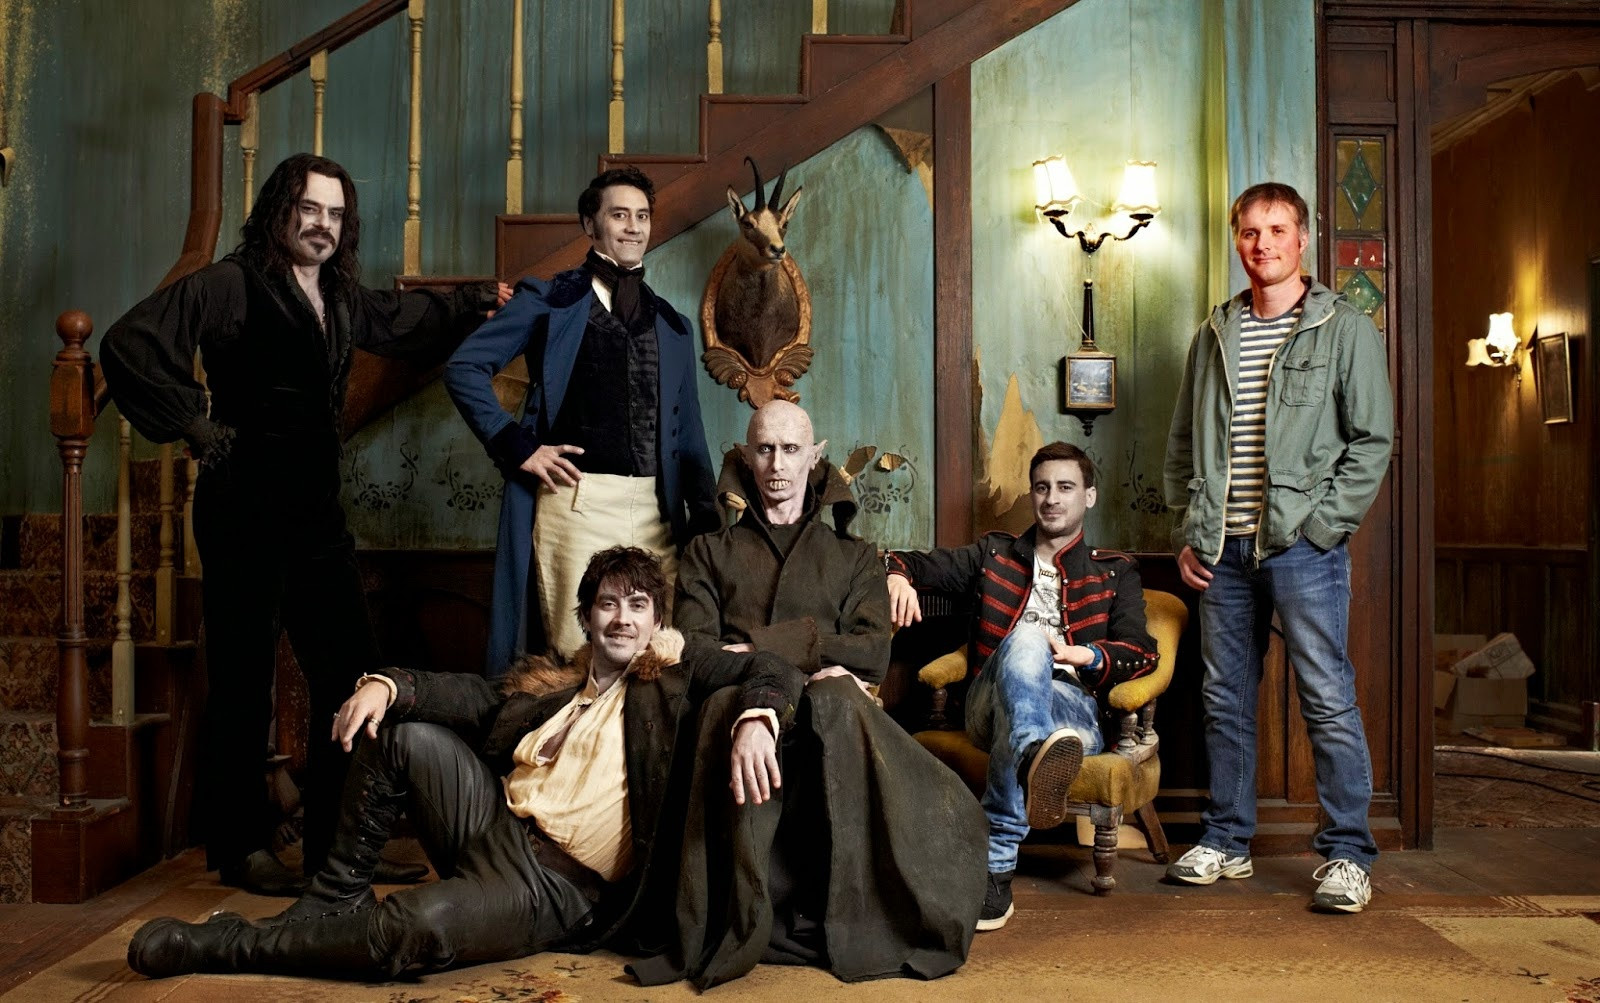 The main cast of the movie What We Do In The Shadows all posing in front of an antique staircase and decor.